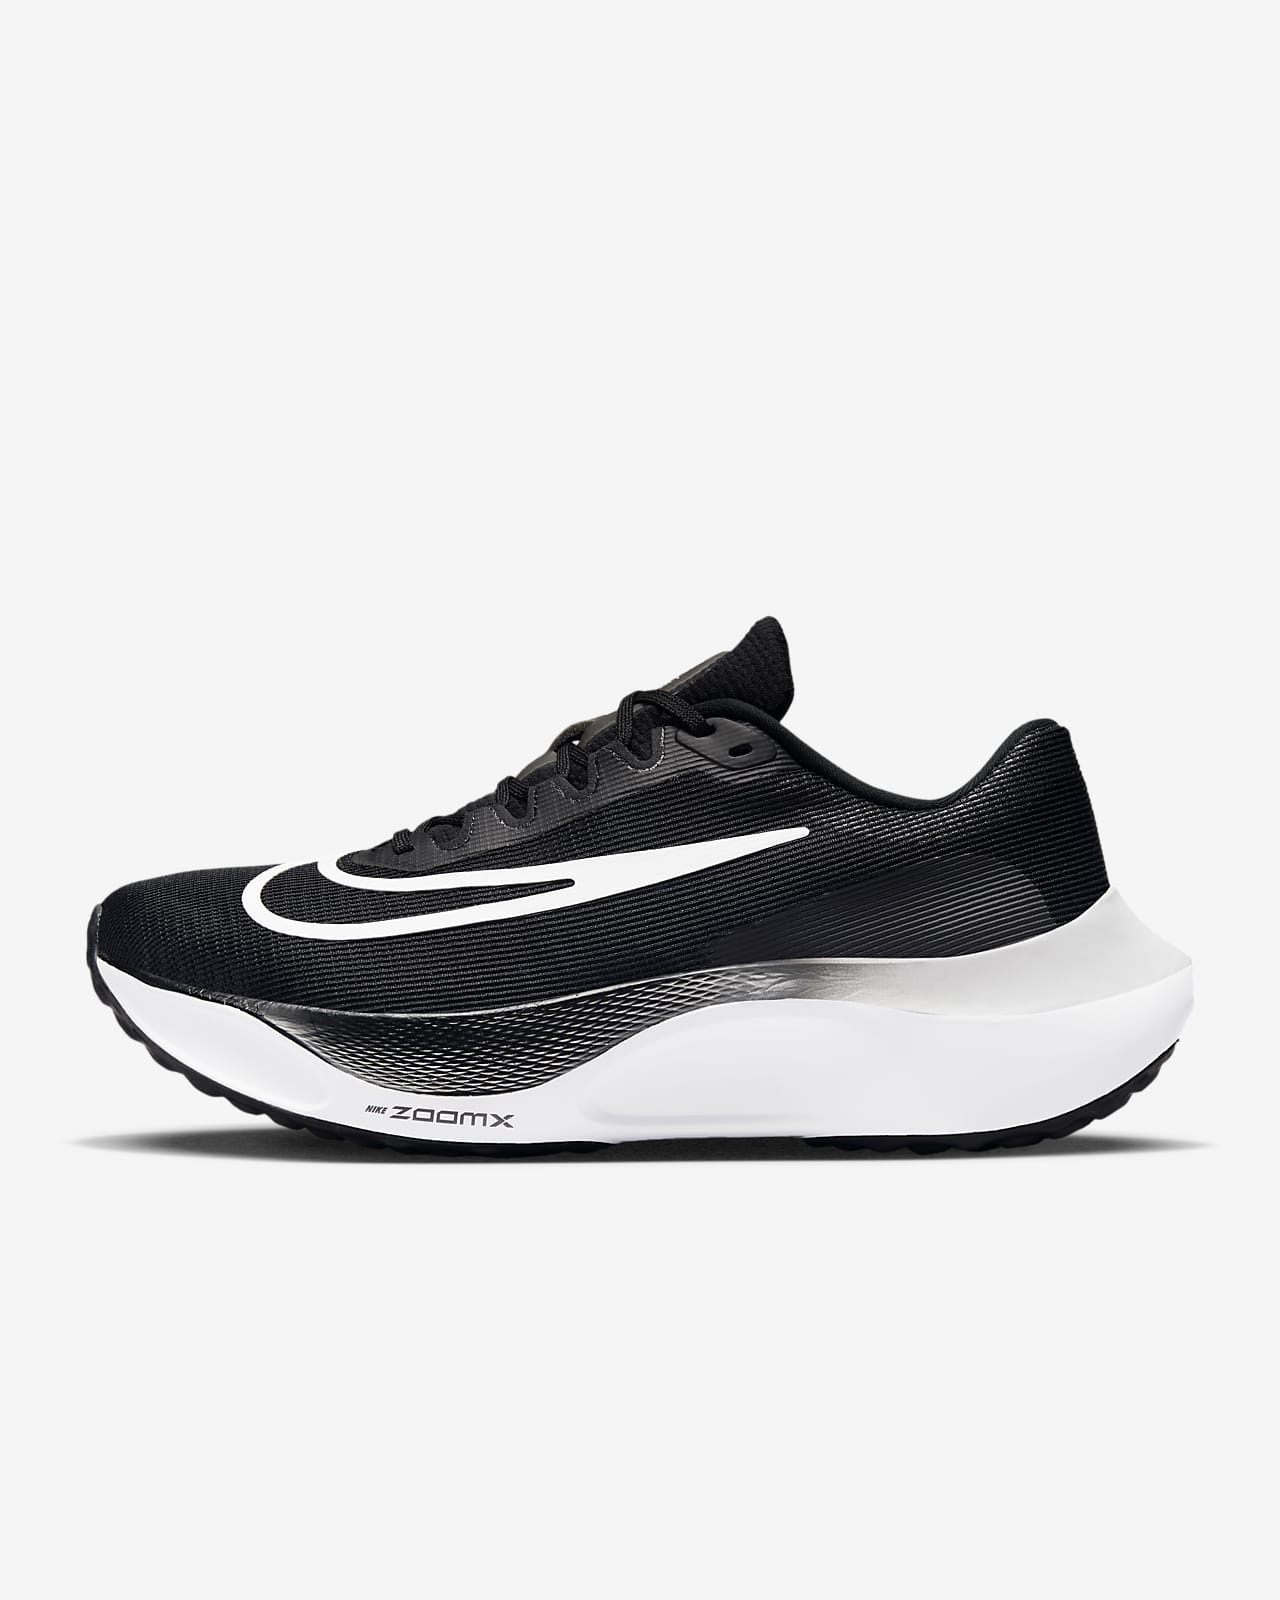 harpoon more and more Ruthless Nike Zoom Fly 5 Men's Road Running Shoes. Nike AU